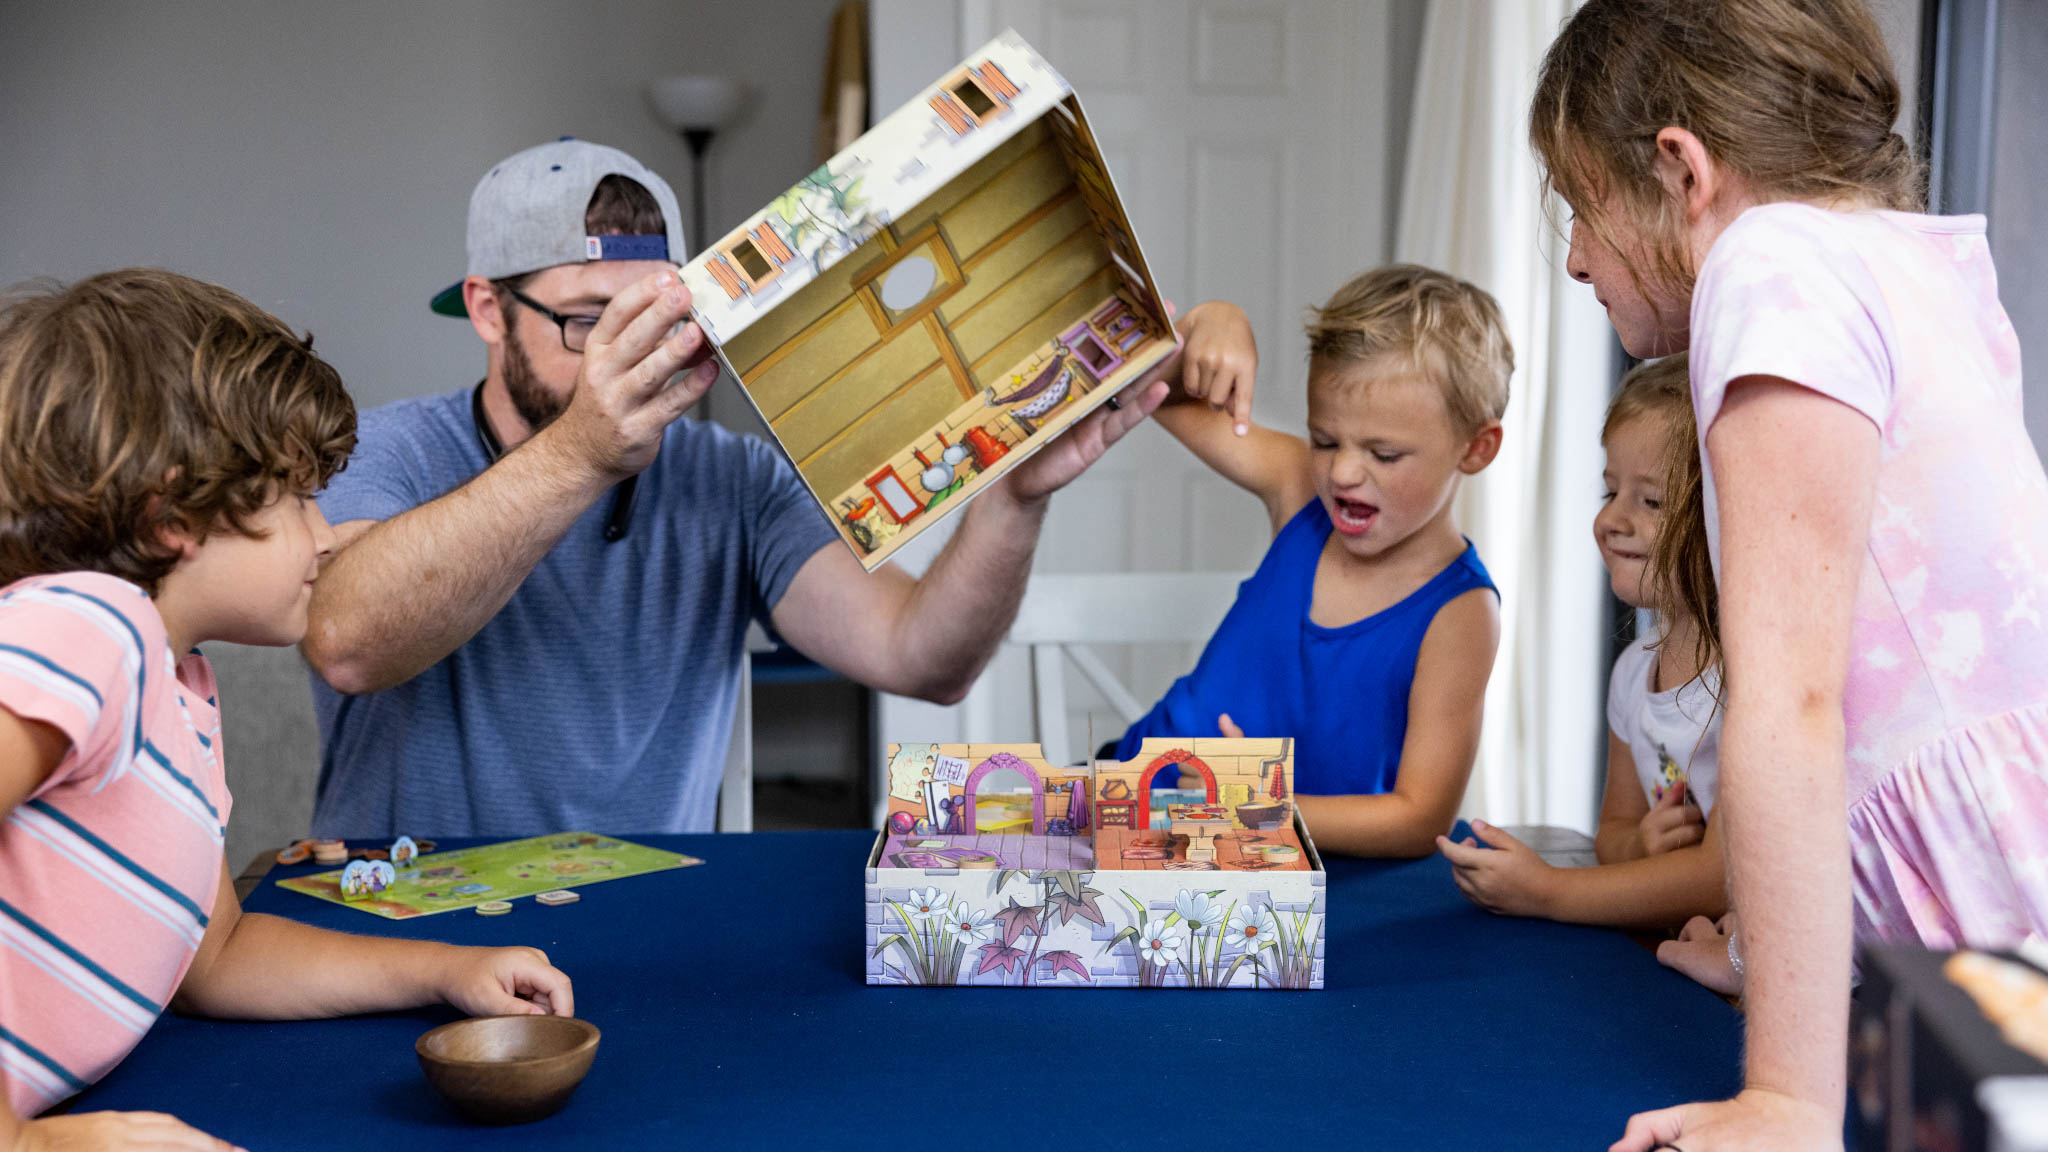 Great Games for 5 Year Olds - The Tabletop Family